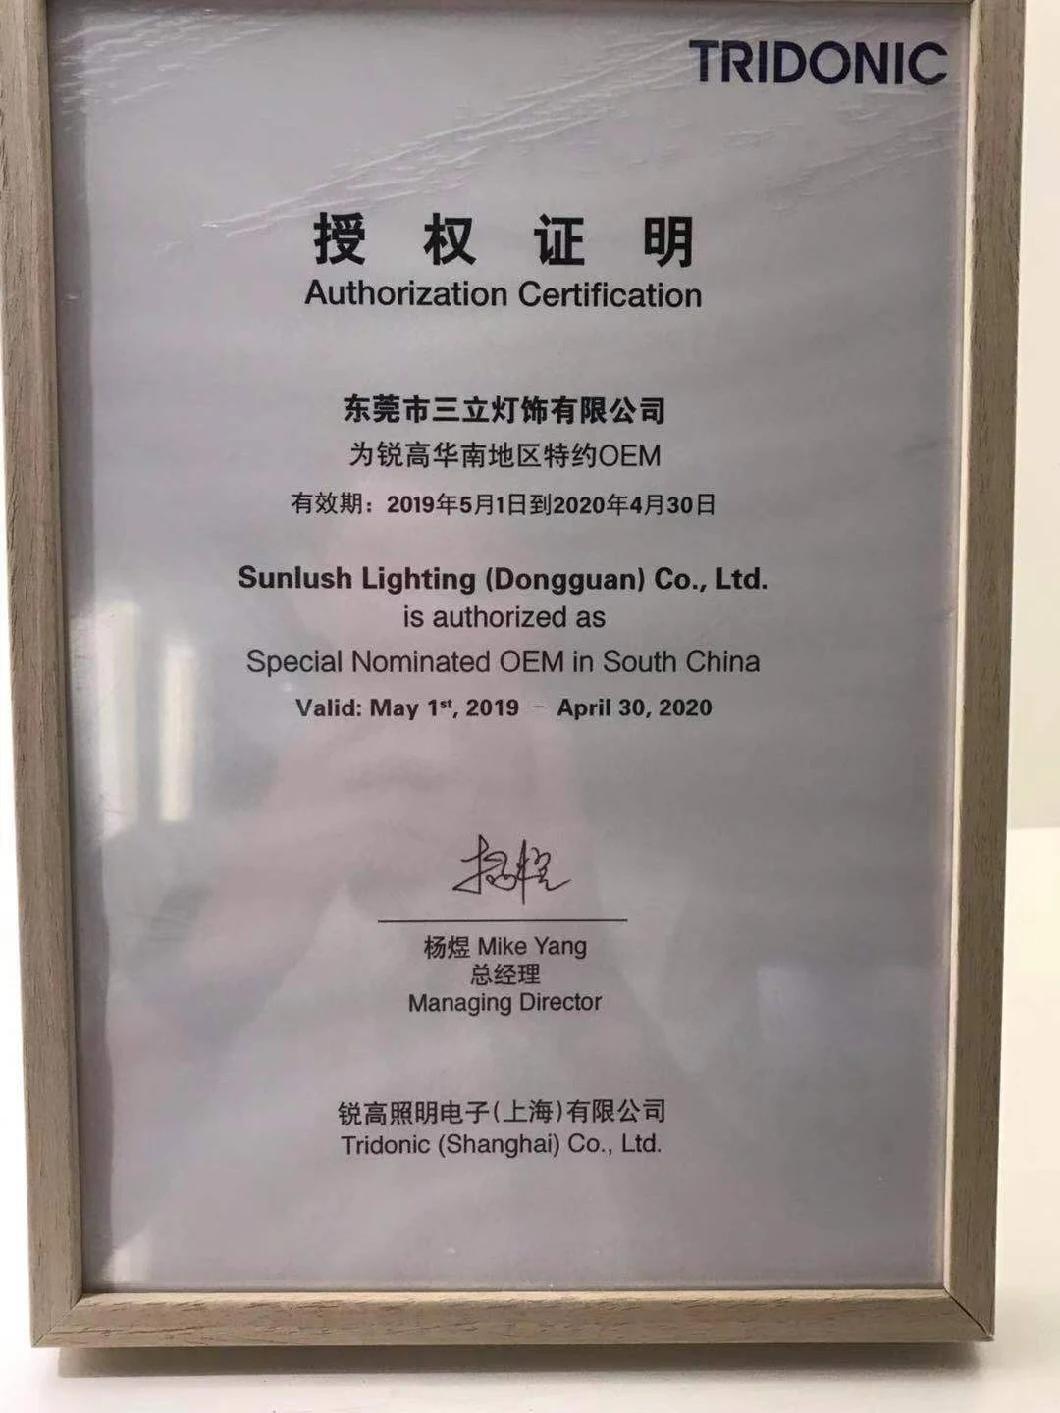 Ce/RoHS Certified IP44 Frame Changeable COB LED LED Downlight